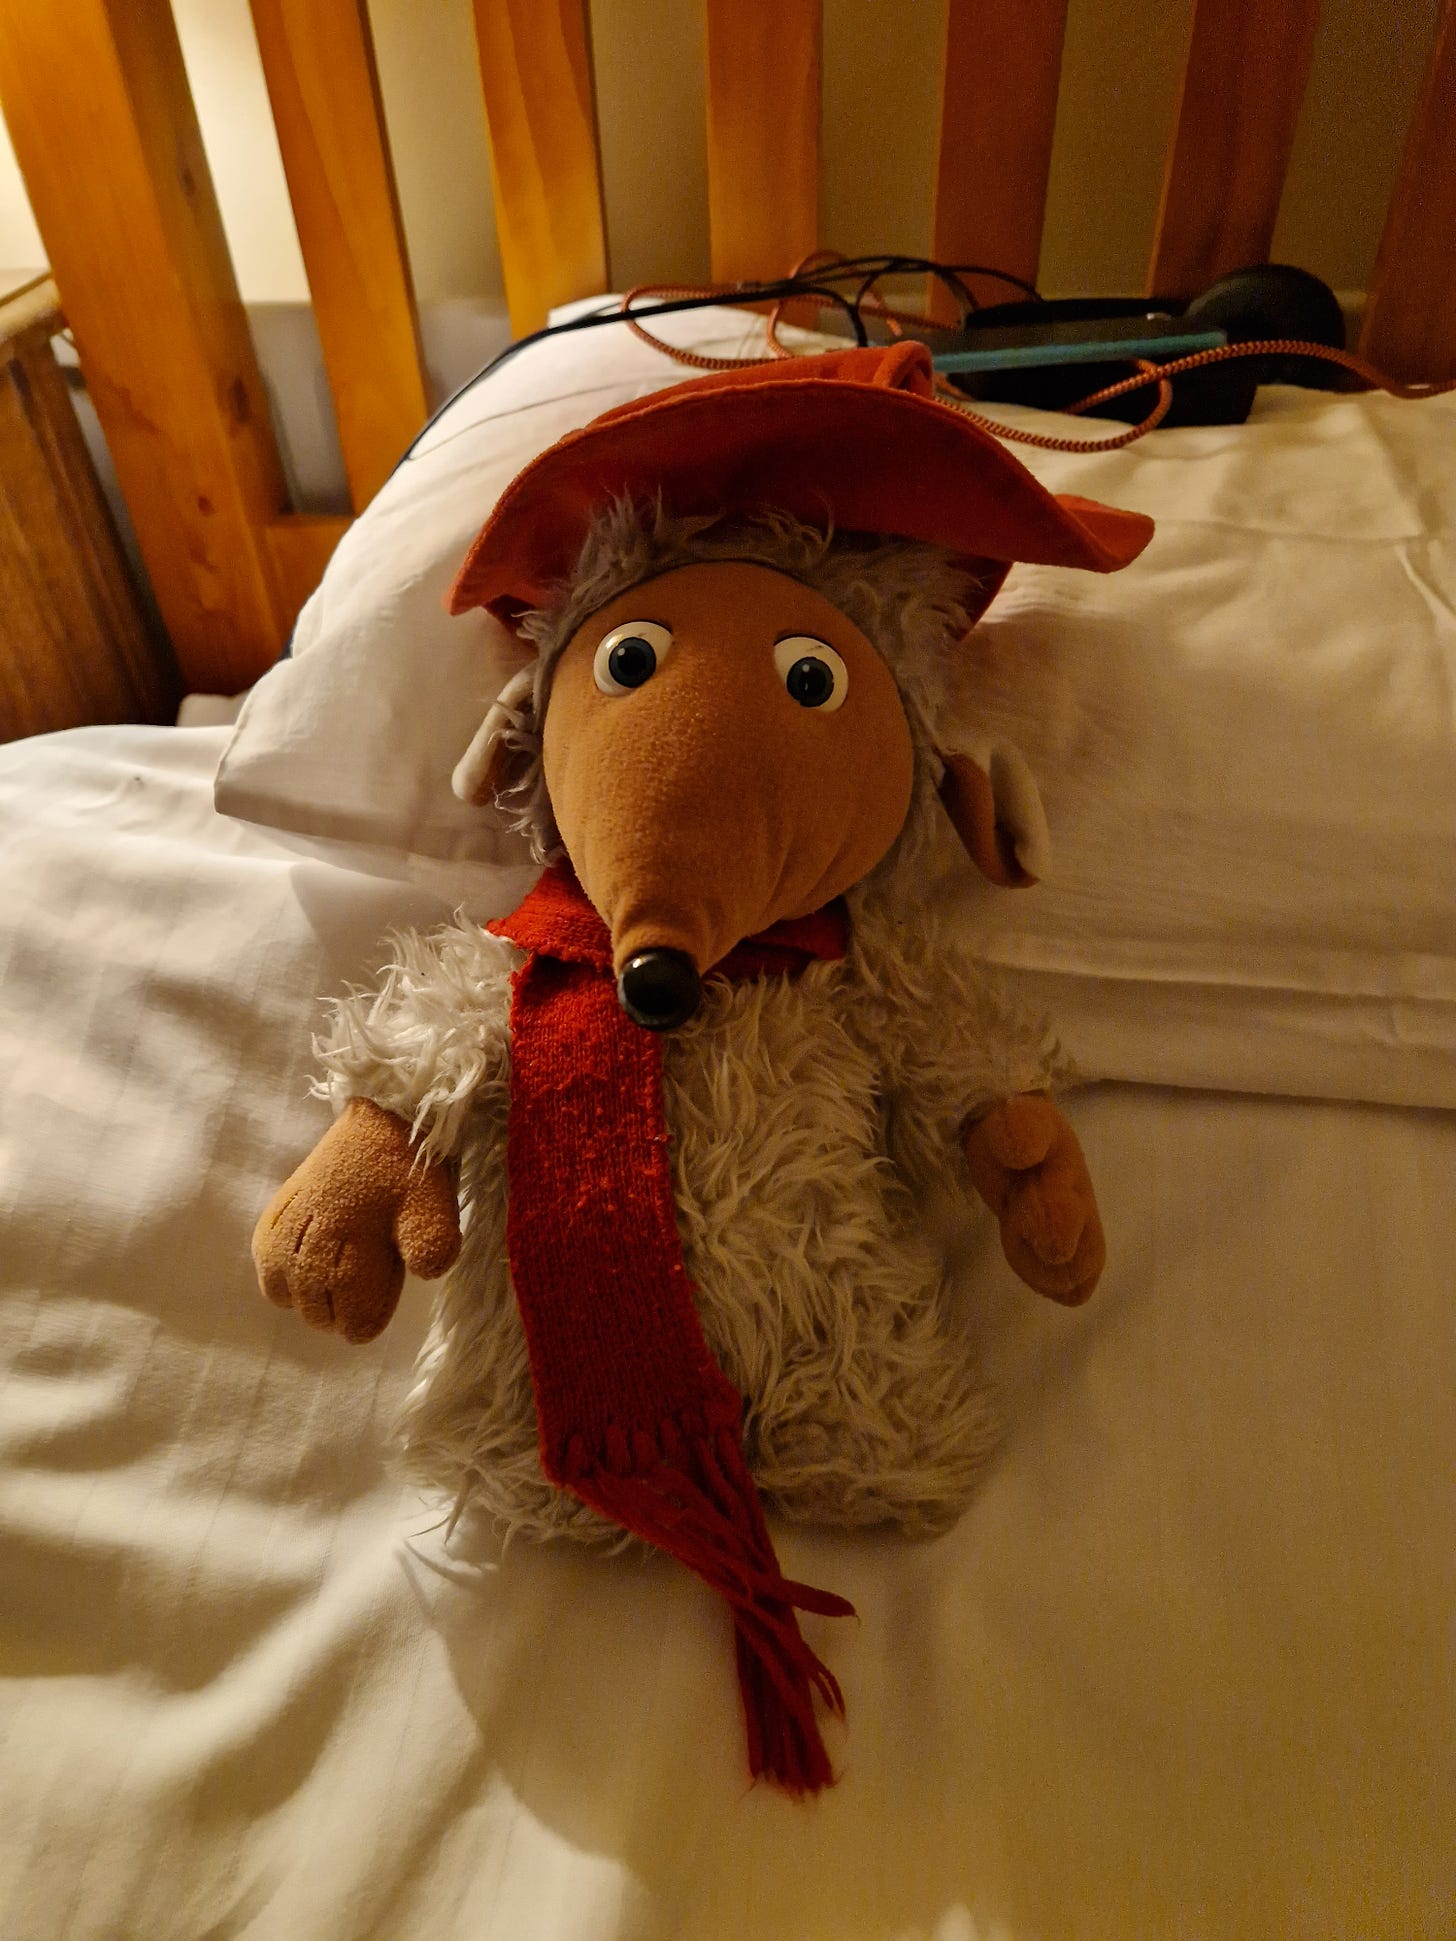 My cuddly toy of Orinoco, the Womble character. He has blue eyes, has grey fur, an orange face and snout, and floppy ears. He wears a reddish brown hat and a red woollen scarf. He is perched on a single bed with white sheets. Behind him is an iPod with a large set of Sony headphones attached to an orange charge cable. 